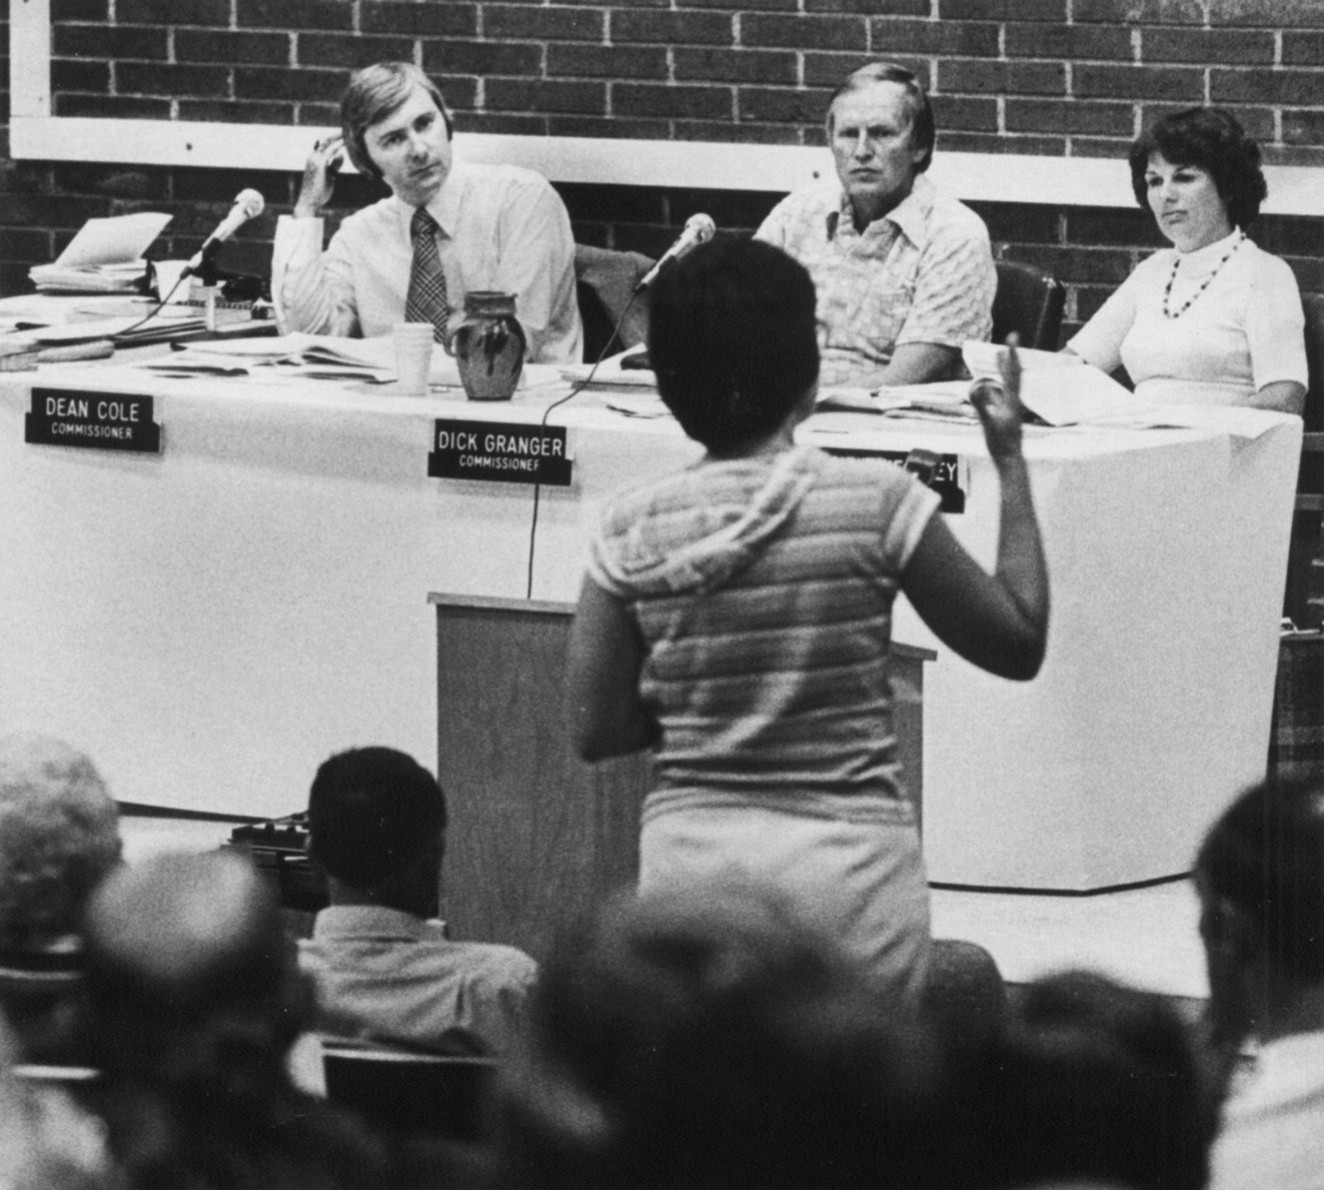 An audience member addresses Clark County Commissioners Dean Cole, from left, Dick Granger and Connie Kearney at a meeting in the 1970s.